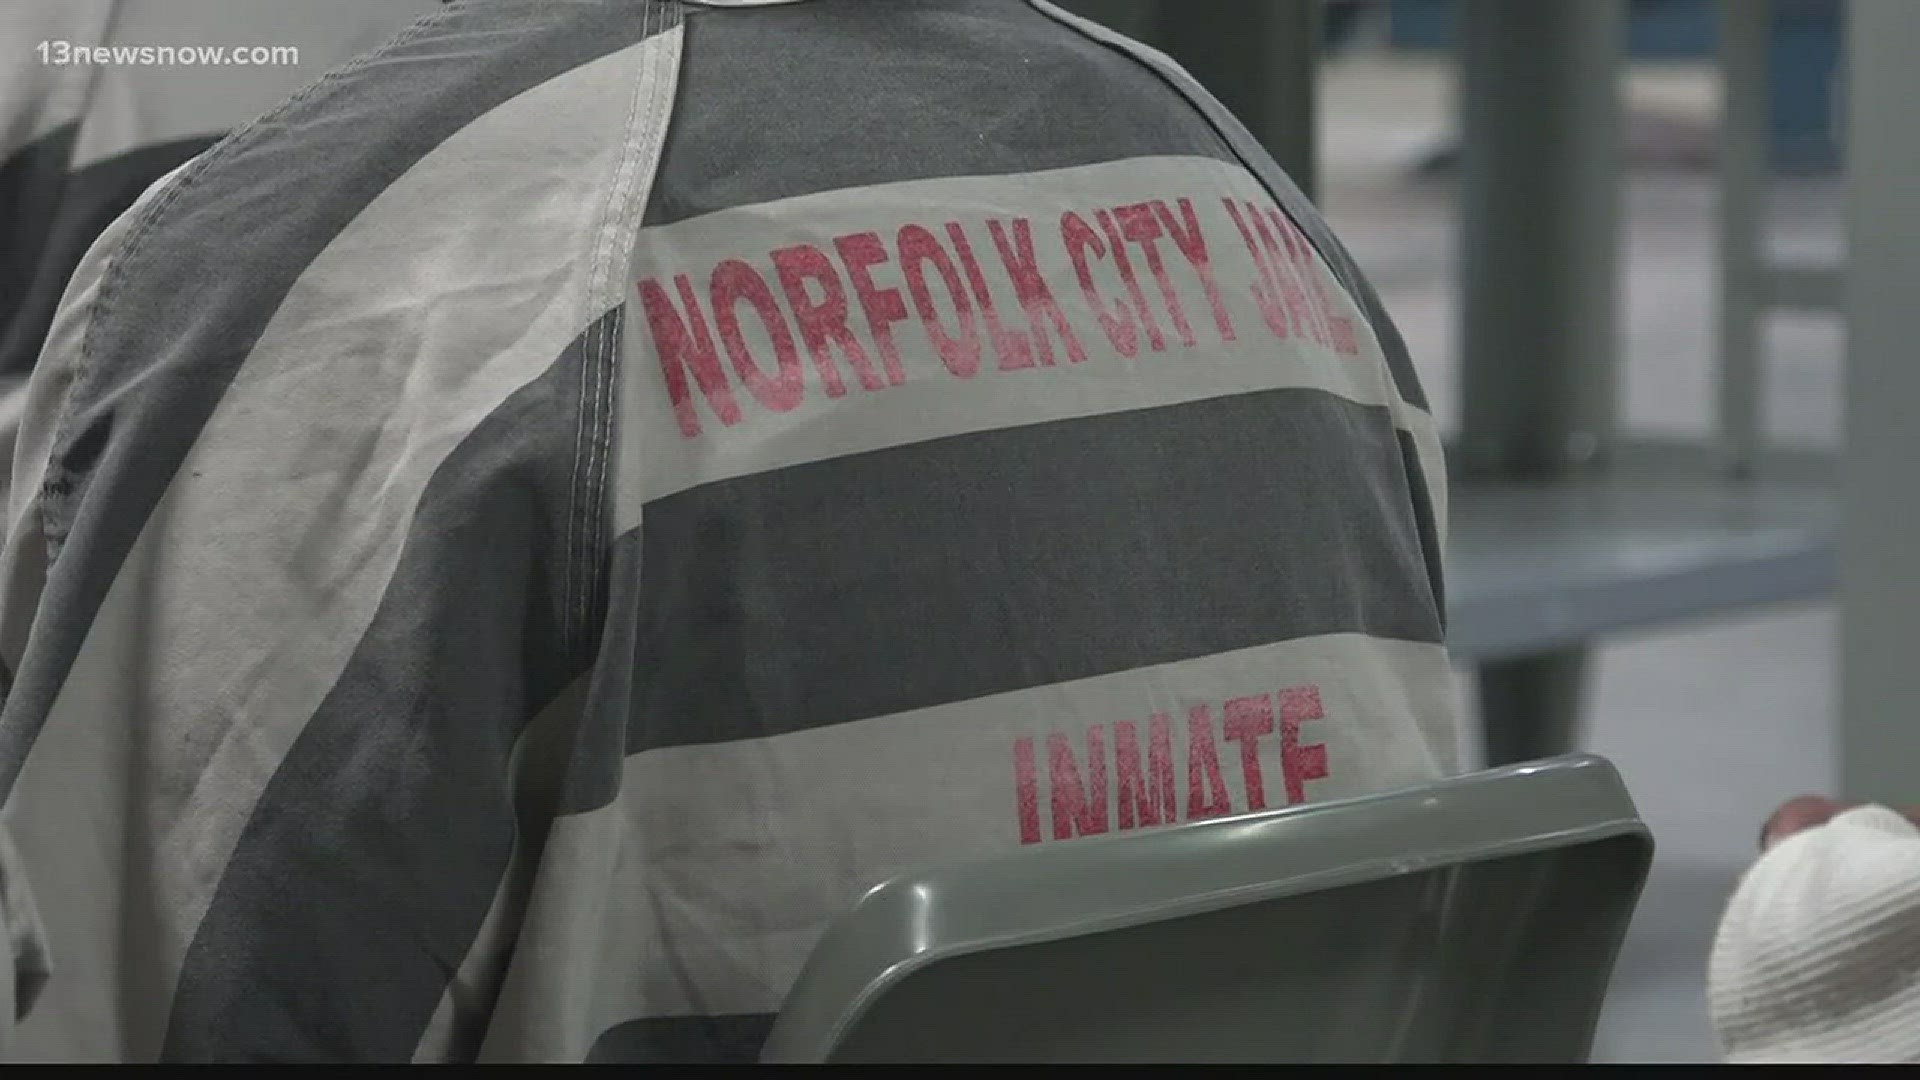 It's a monumental day for ten inmates at the Norfolk City Jail.